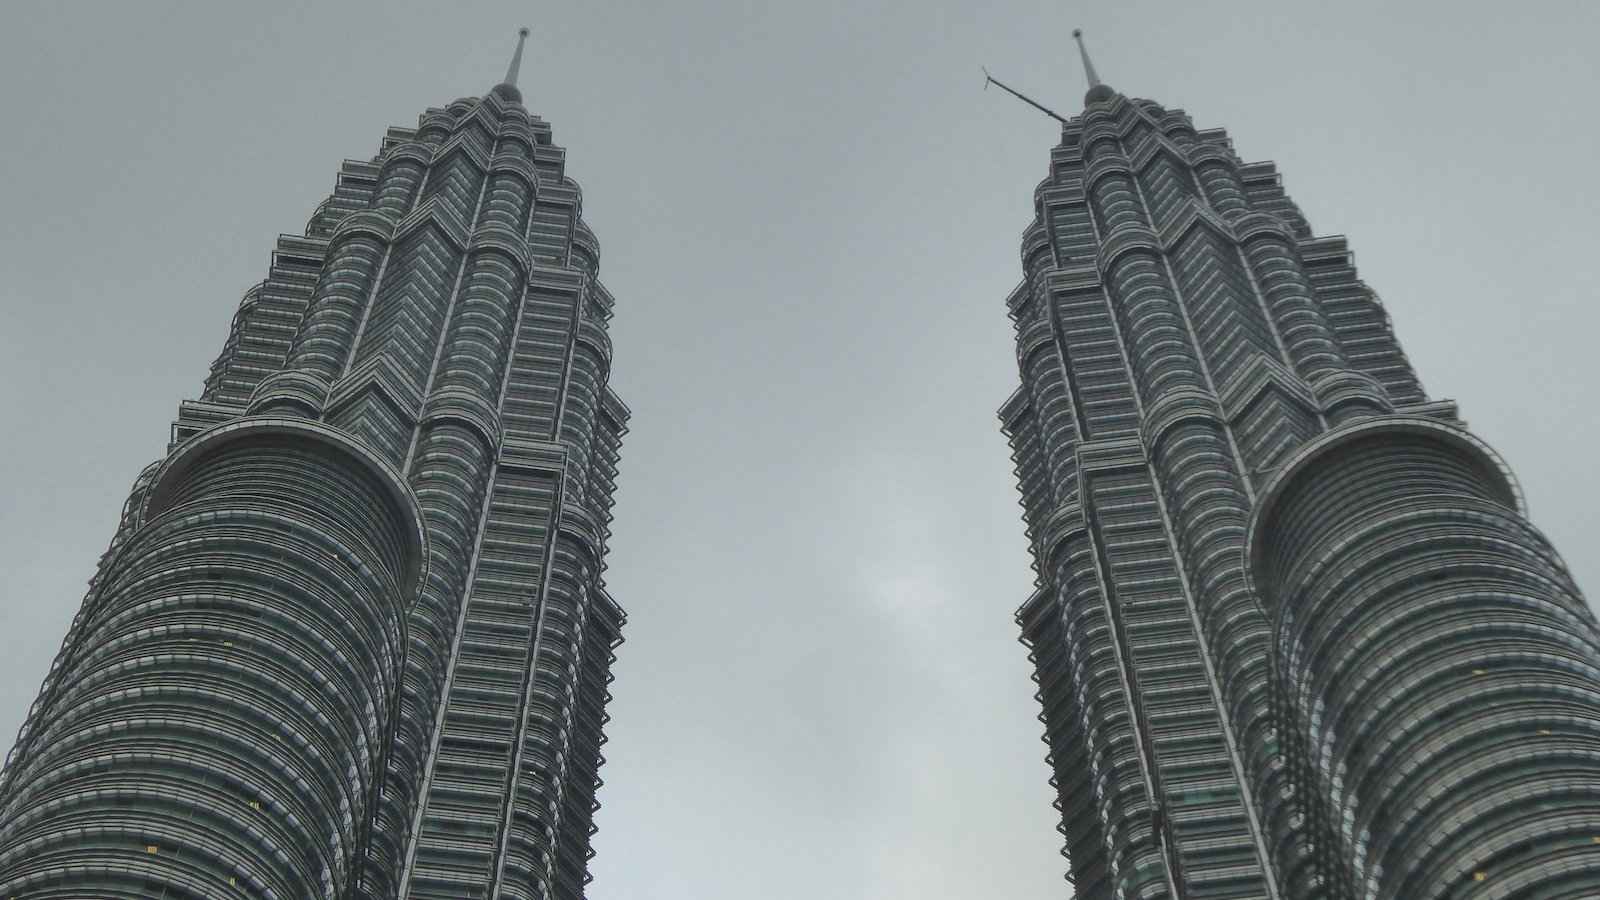 The Petronas Towers in Malaysia are the tallest twin towers in the world